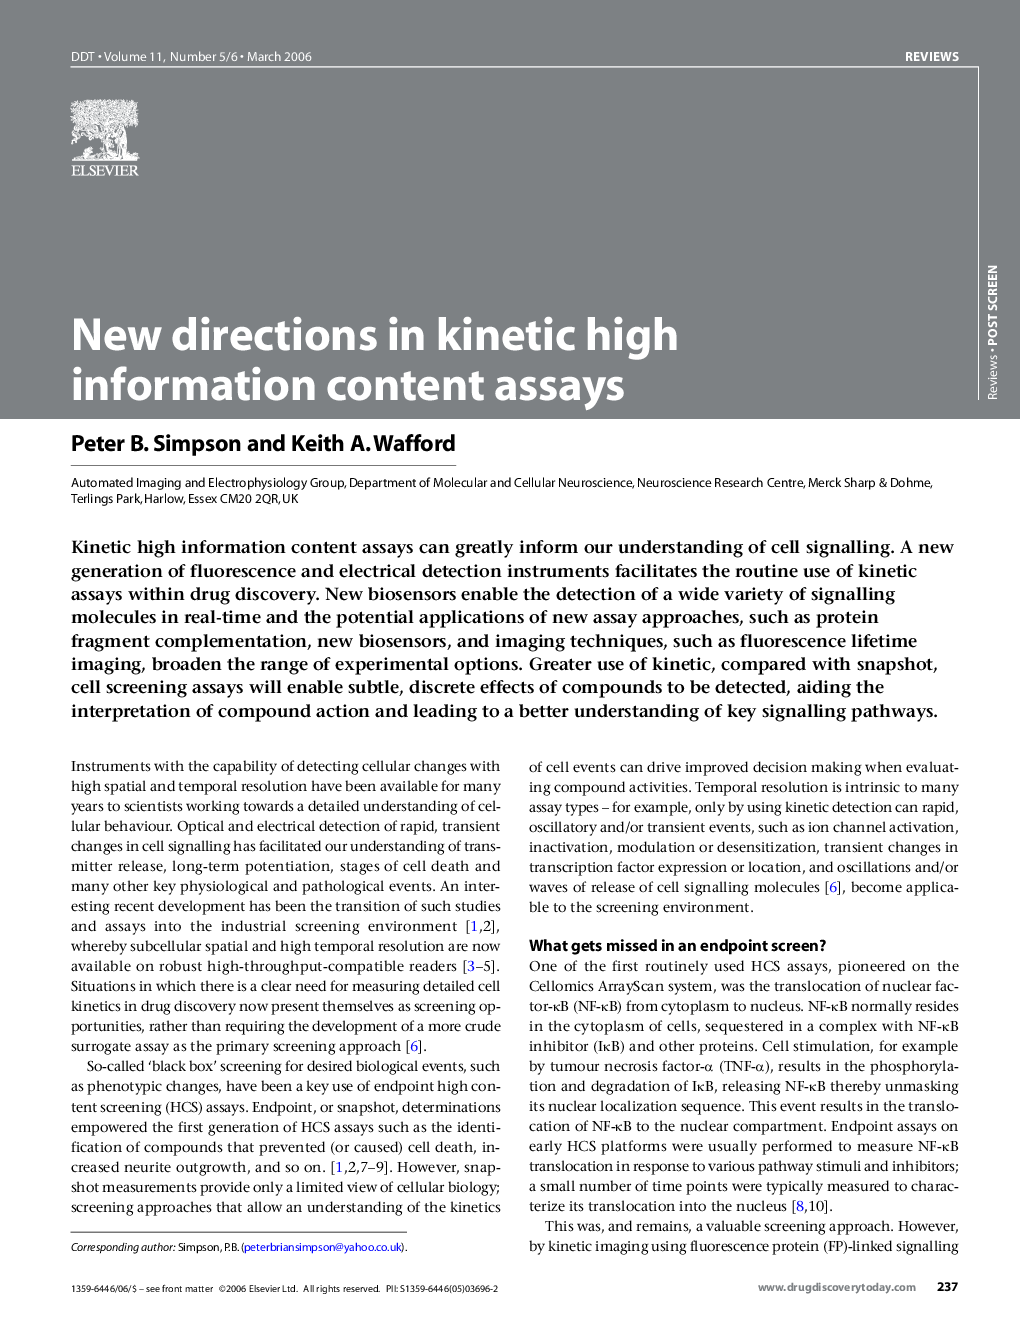 New directions in kinetic high information content assays